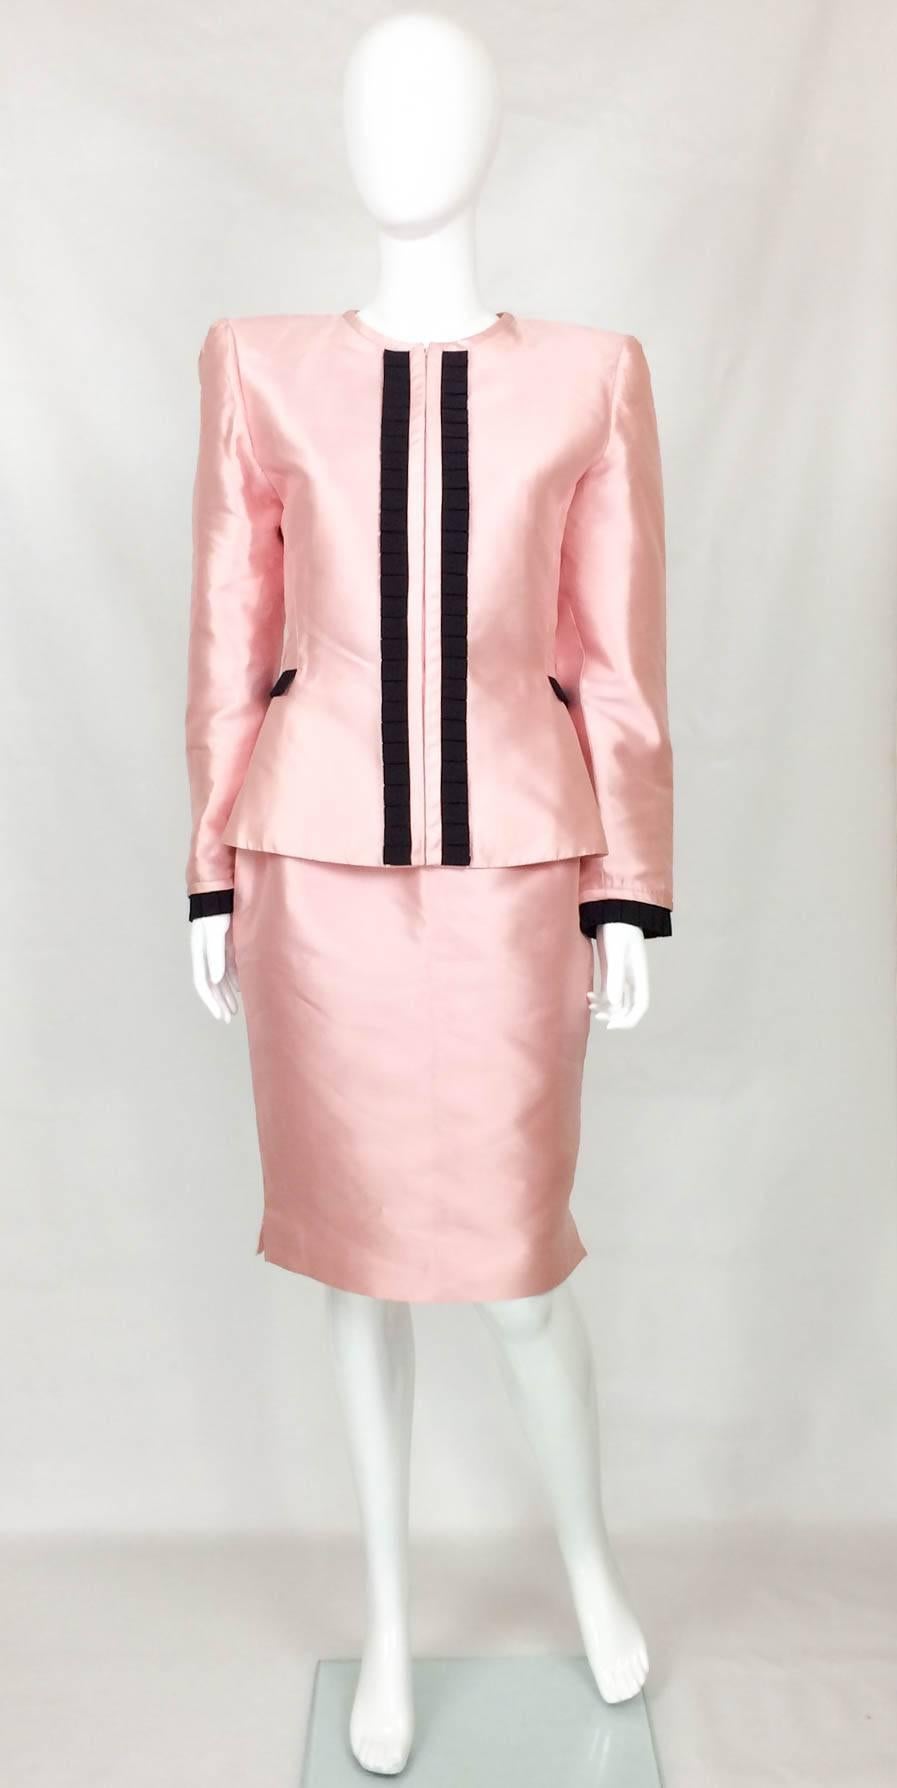 Elegant Valentino Silk Skirt Suit. This gorgeous ensemble in pastel pink pure silk features a black pleat trimming detail down the front, on the cuffs and across the waist on the back. The jacket has a defined waist, invisible zipper down the front